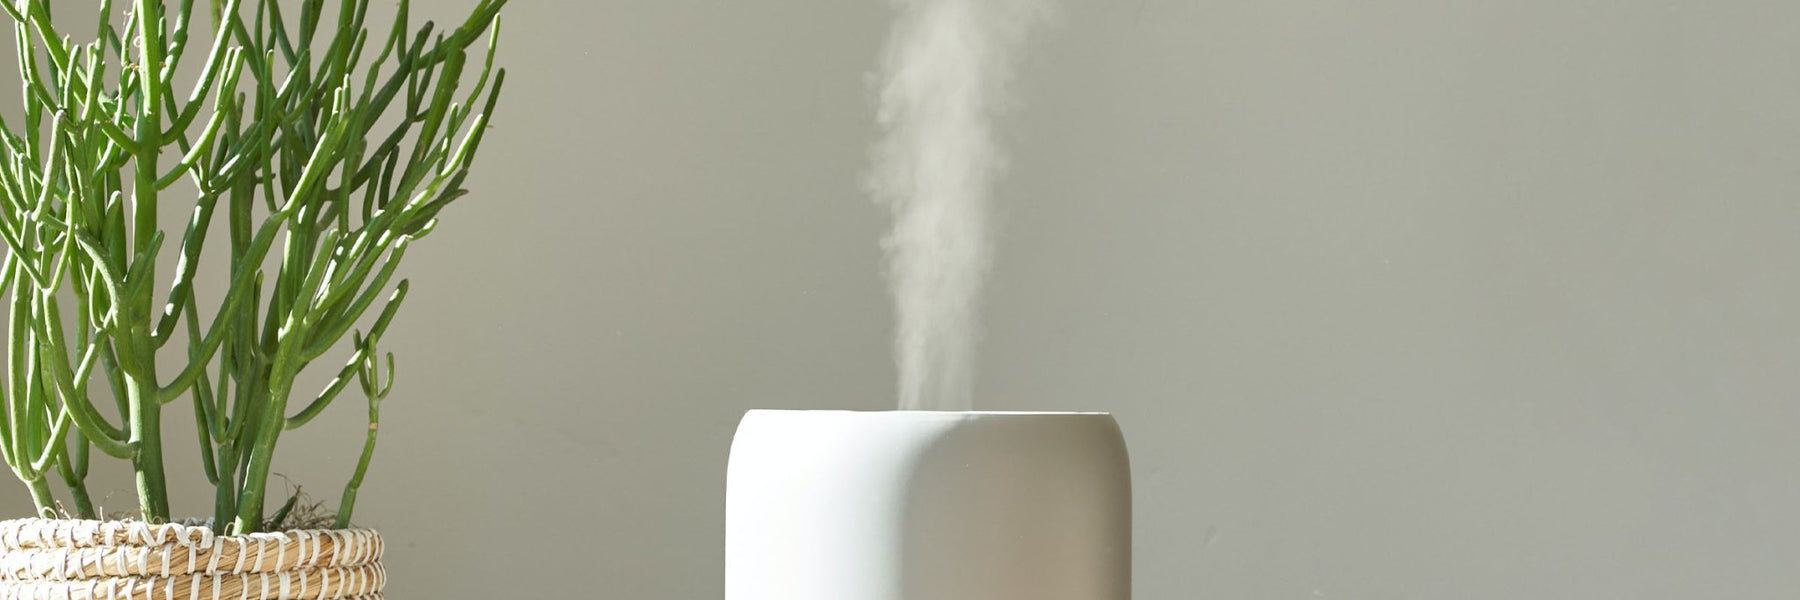 Humidifier Benefits for Skin